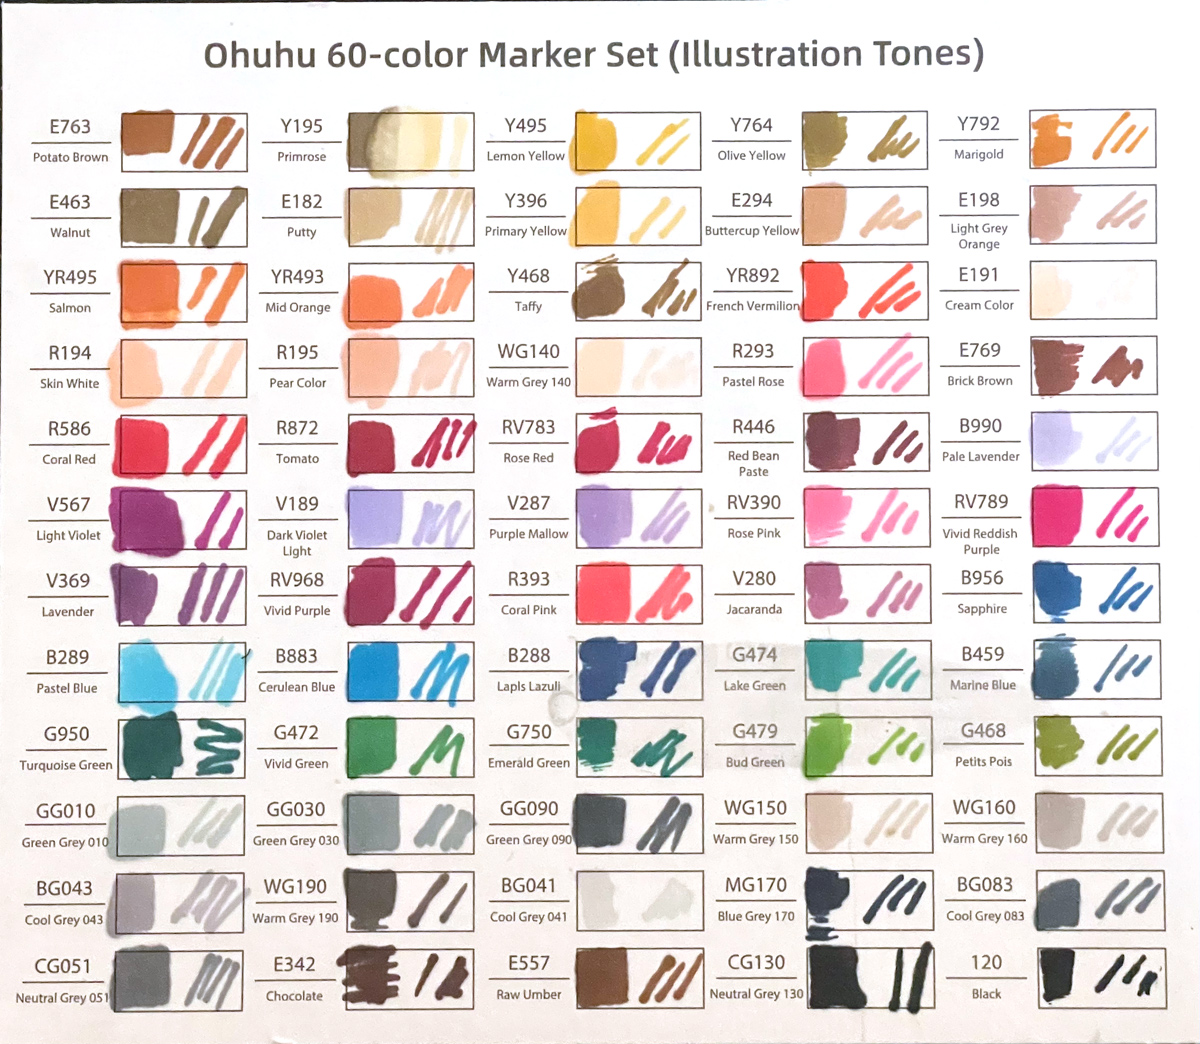 Swatch with me the 120 set of OHUHU HONOLULU alcohol markers 